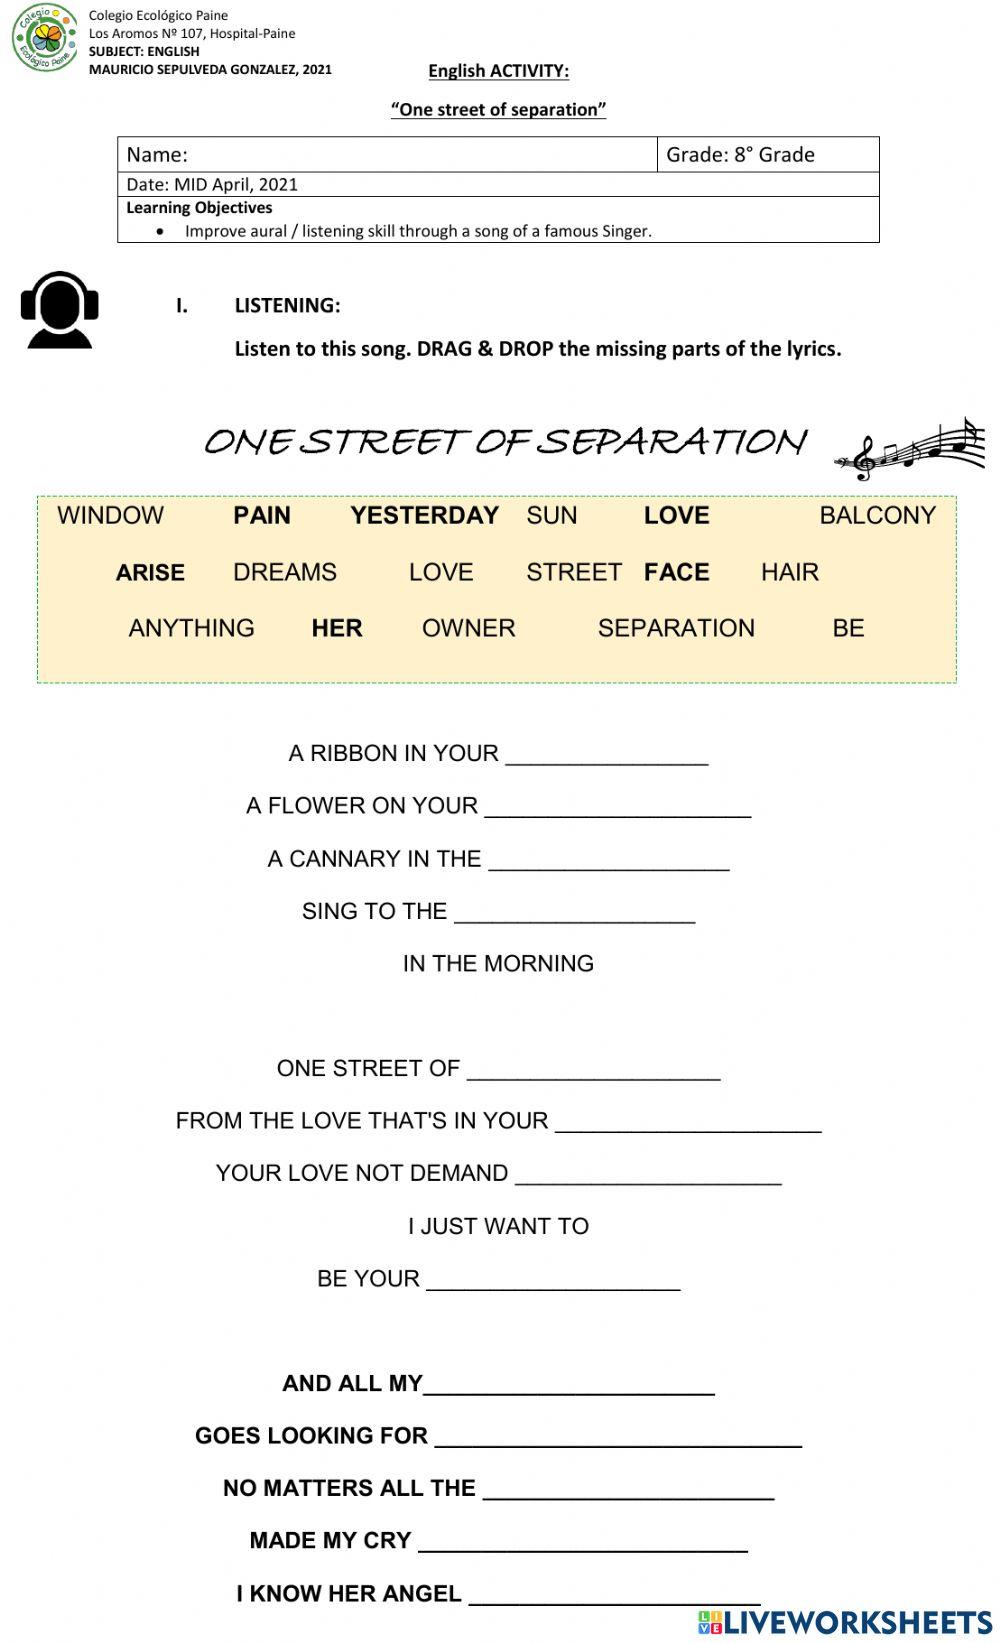 One Street of Separation-